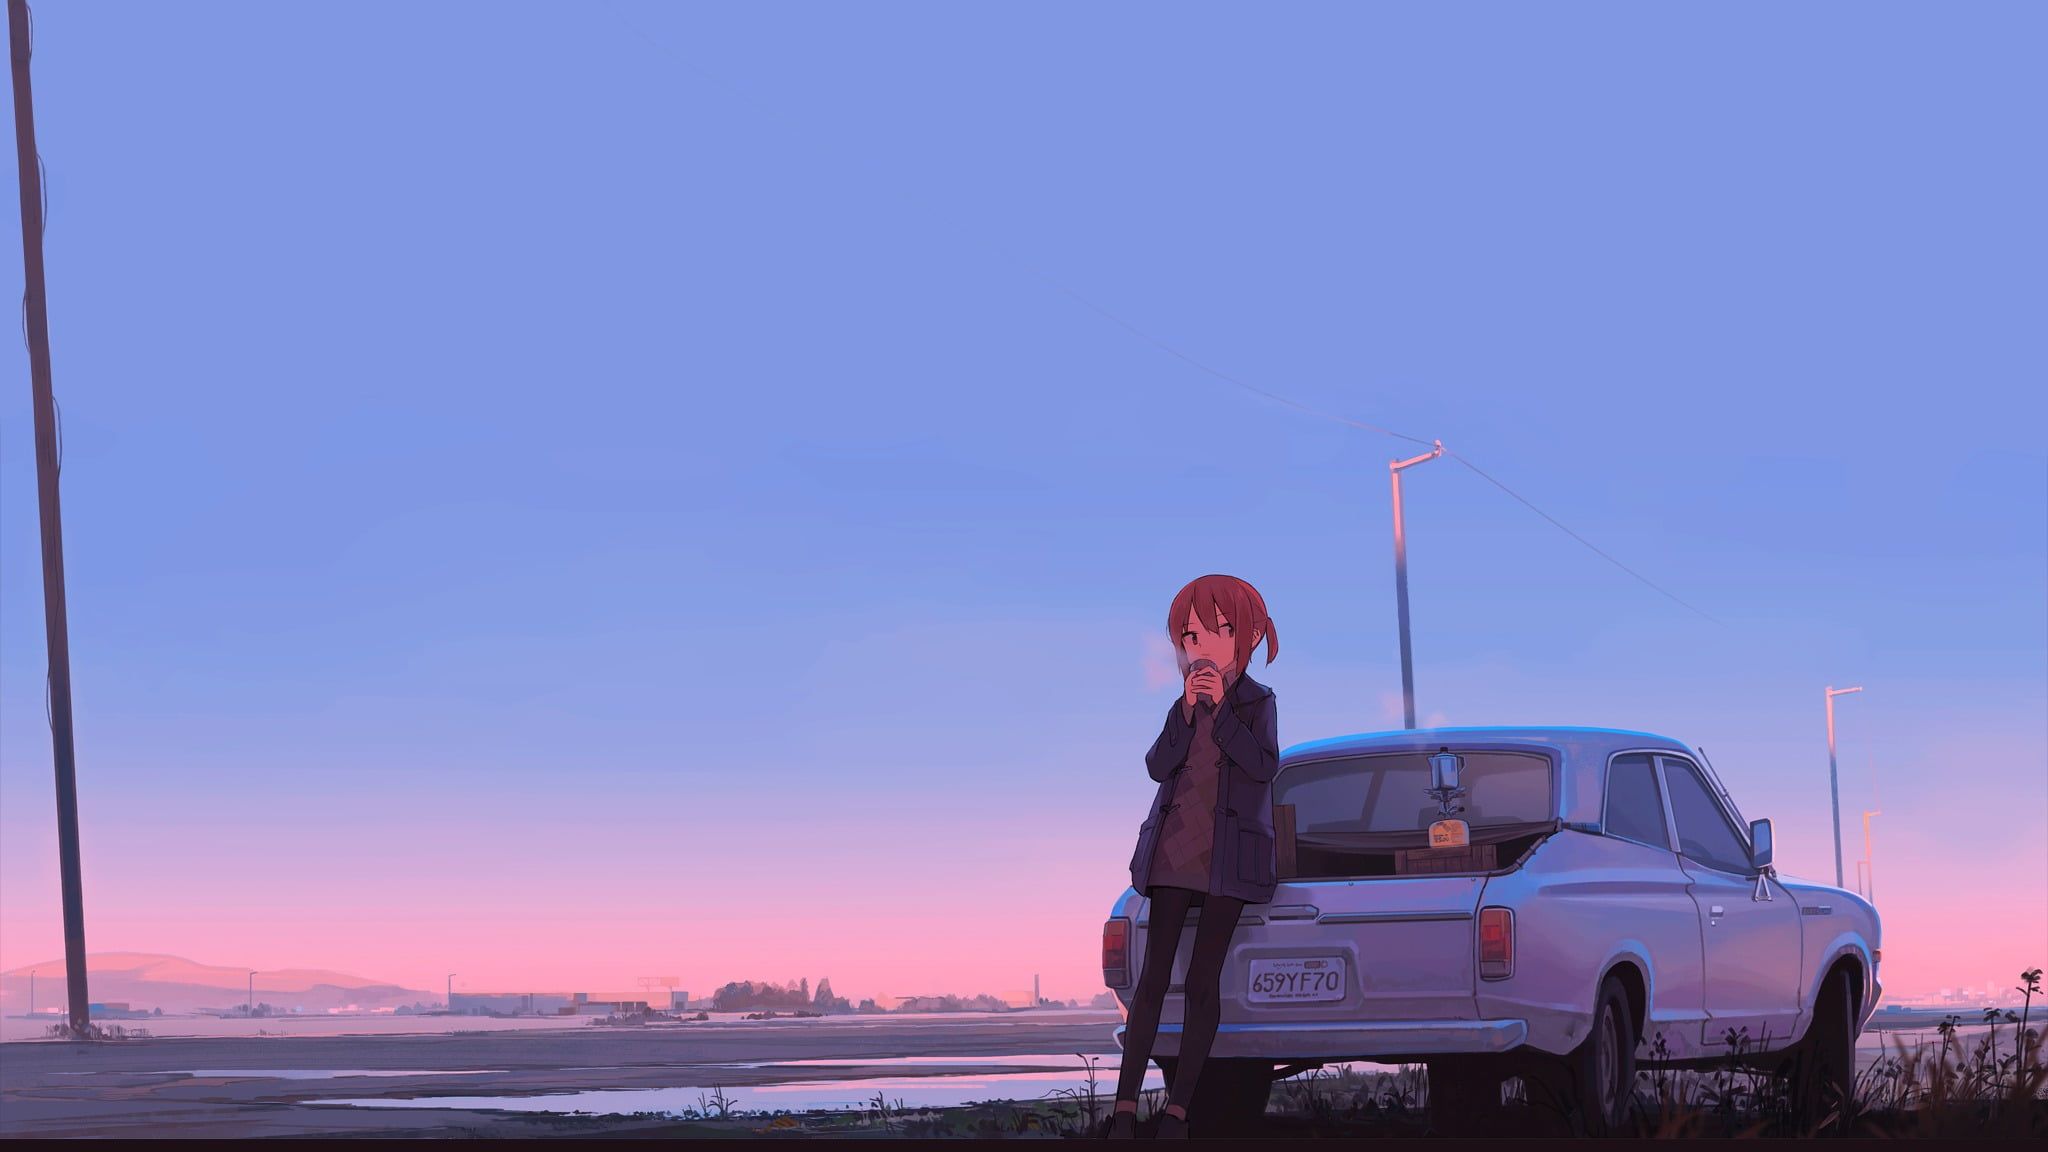 female anime character leaning on silver coupe wallpaper #car #sunset anime girls original charactx1152 wallpaper, Anime scenery wallpaper, Chill wallpaper